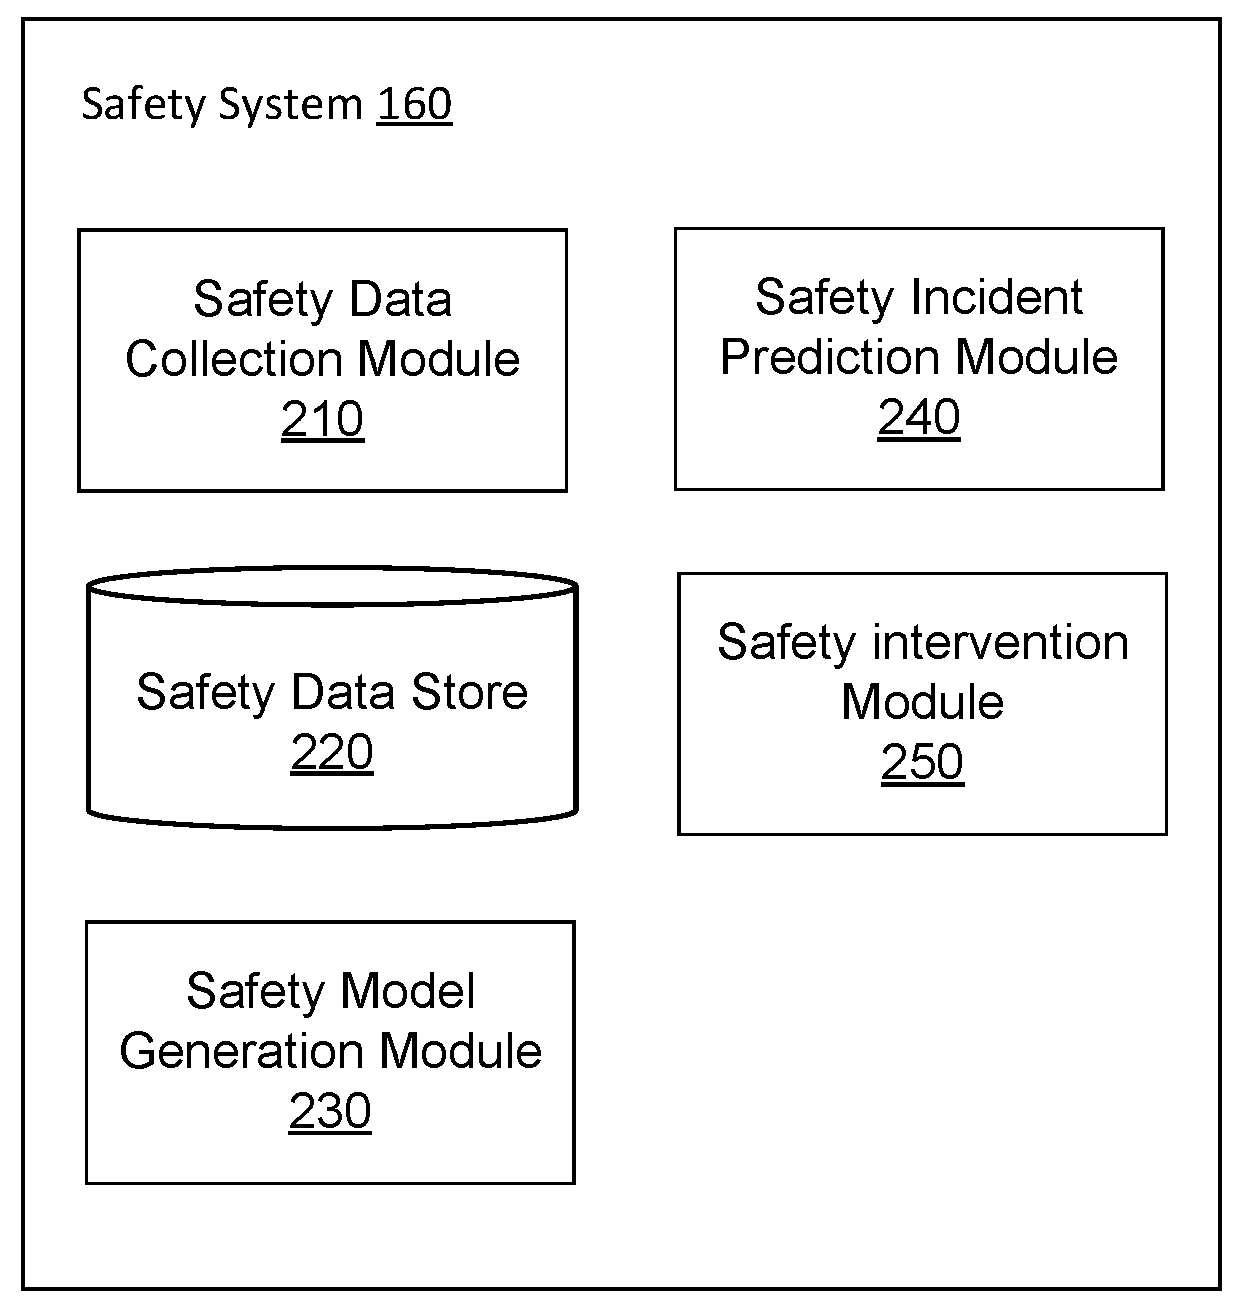 Predicting safety incidents using machine learning